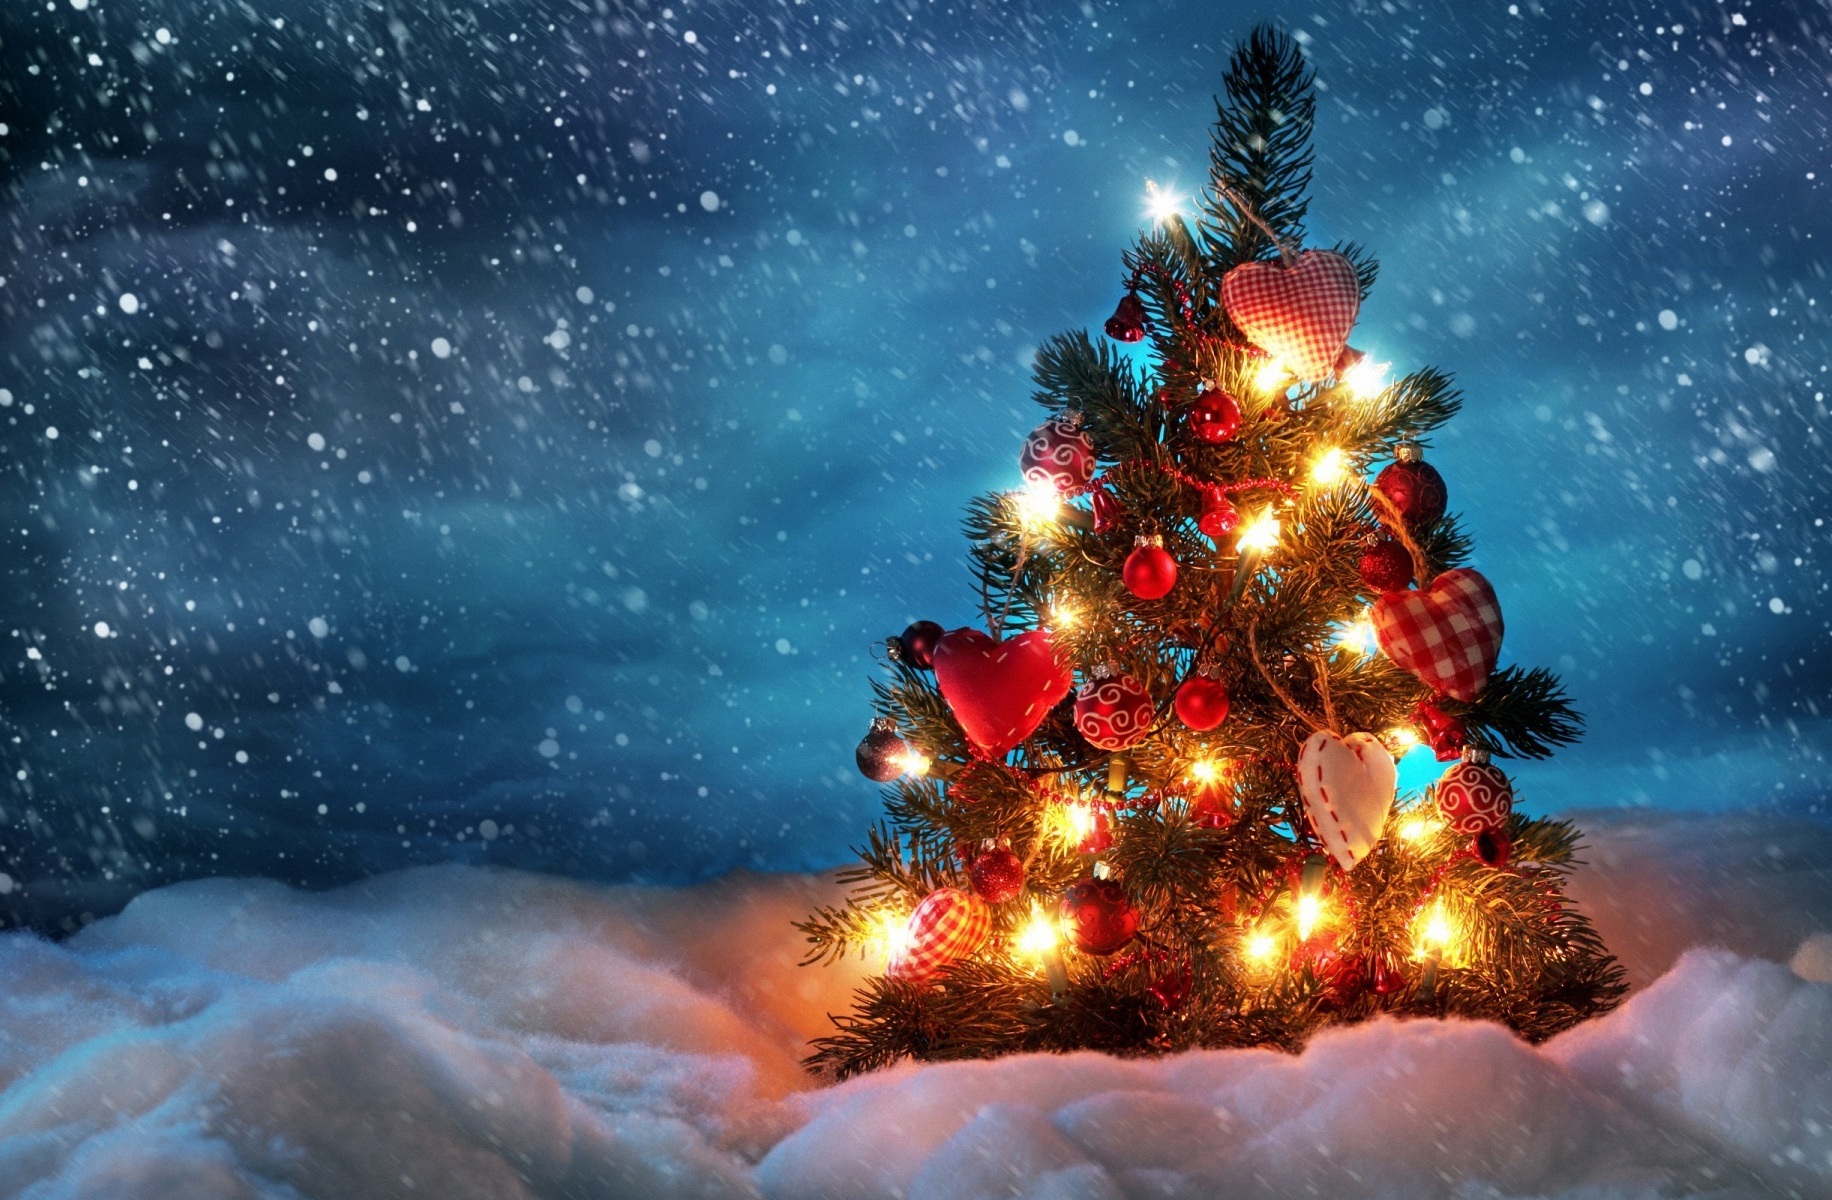 hd wallpaper with christmas tree